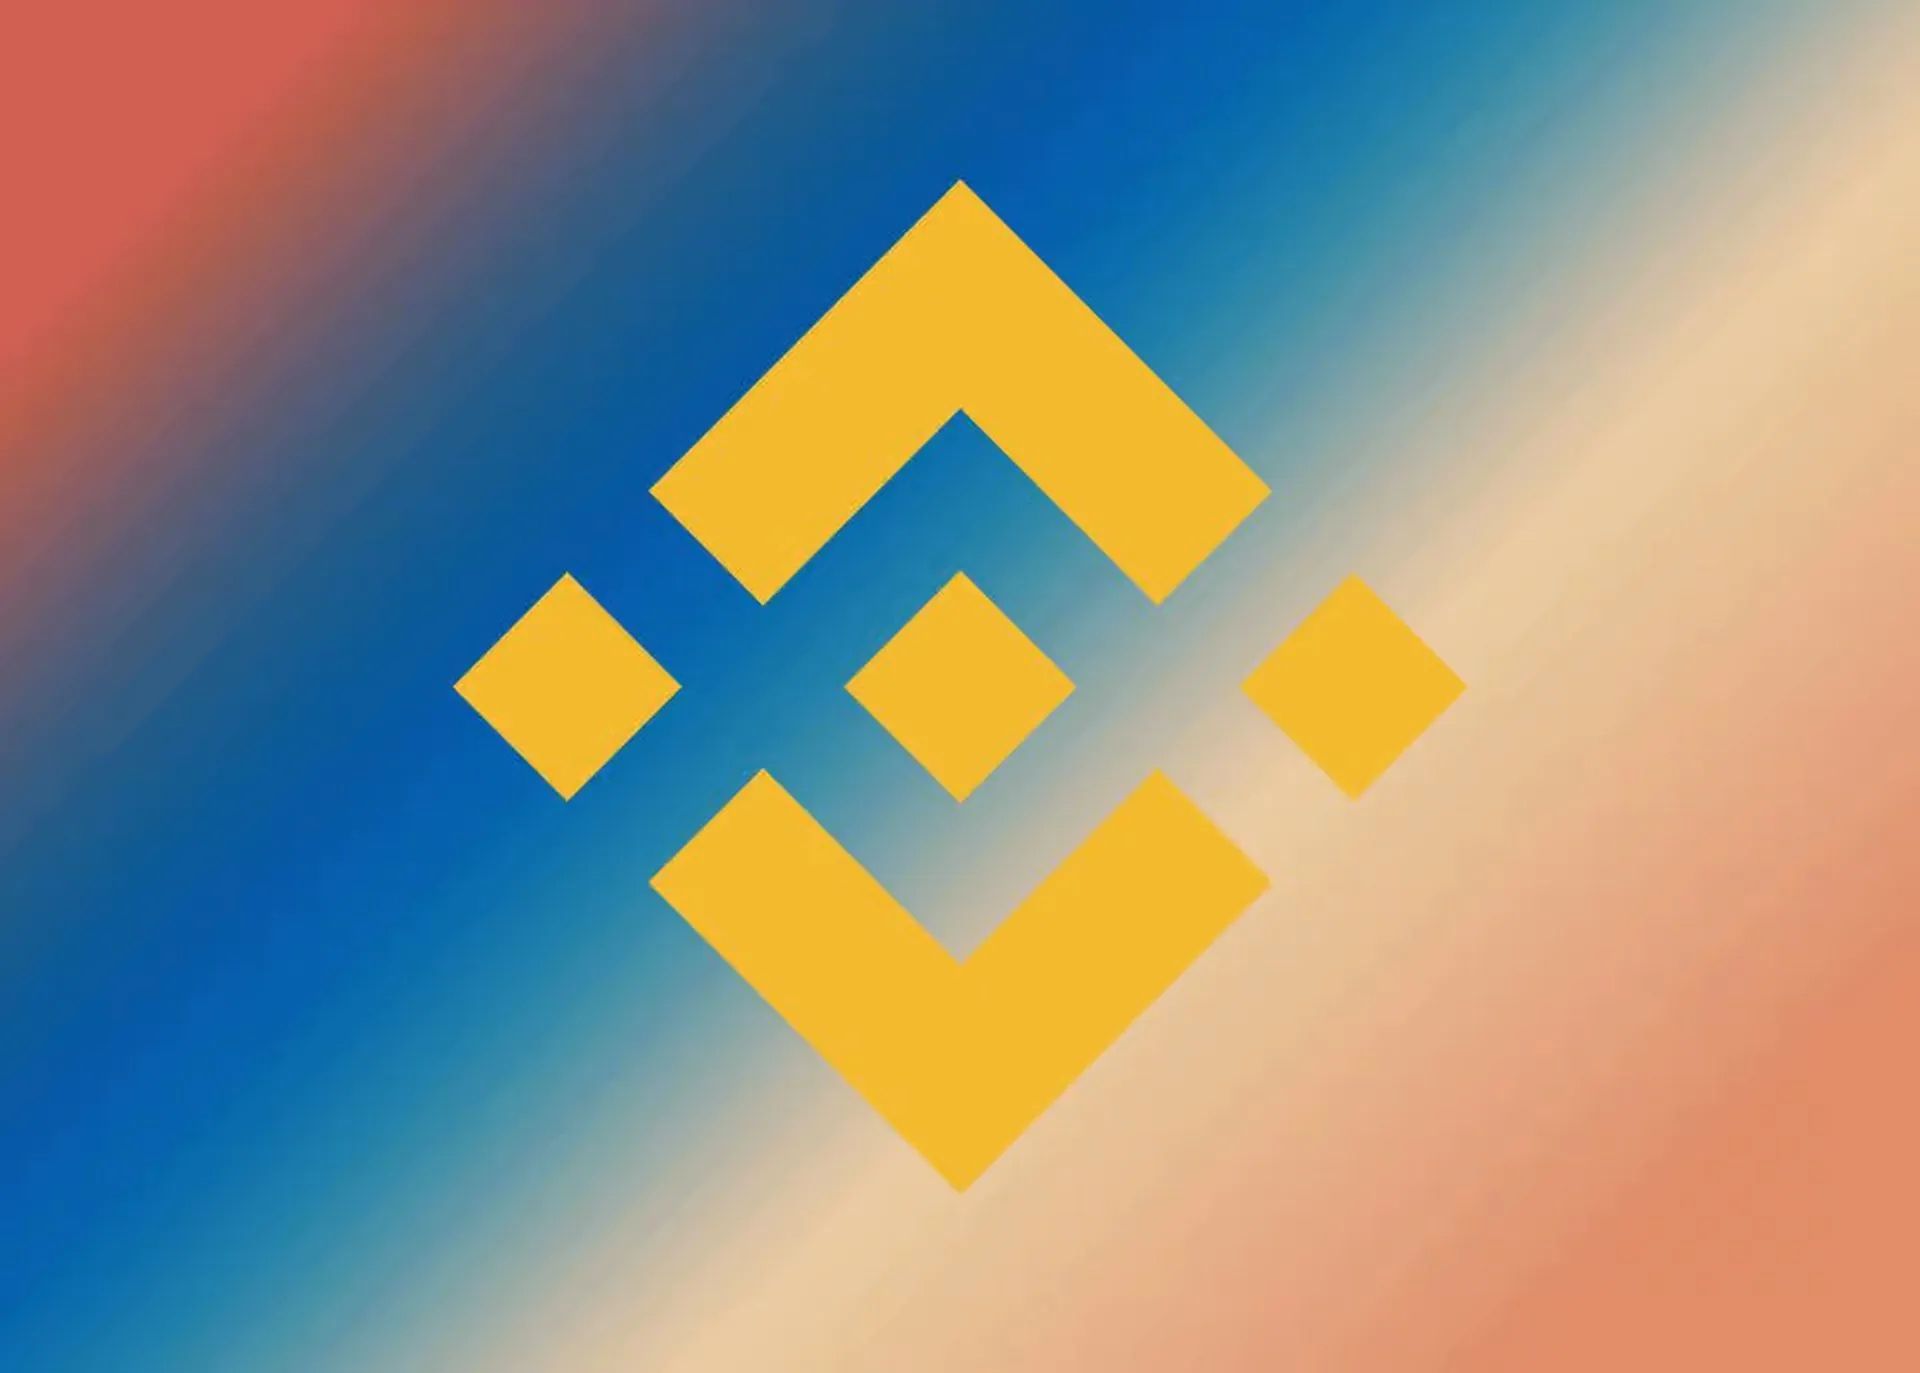 Today, we are here to show you the Binance Crypto WODL answers (September 12). If you find the correct cryptocurrency term in the Binance news, you might win...